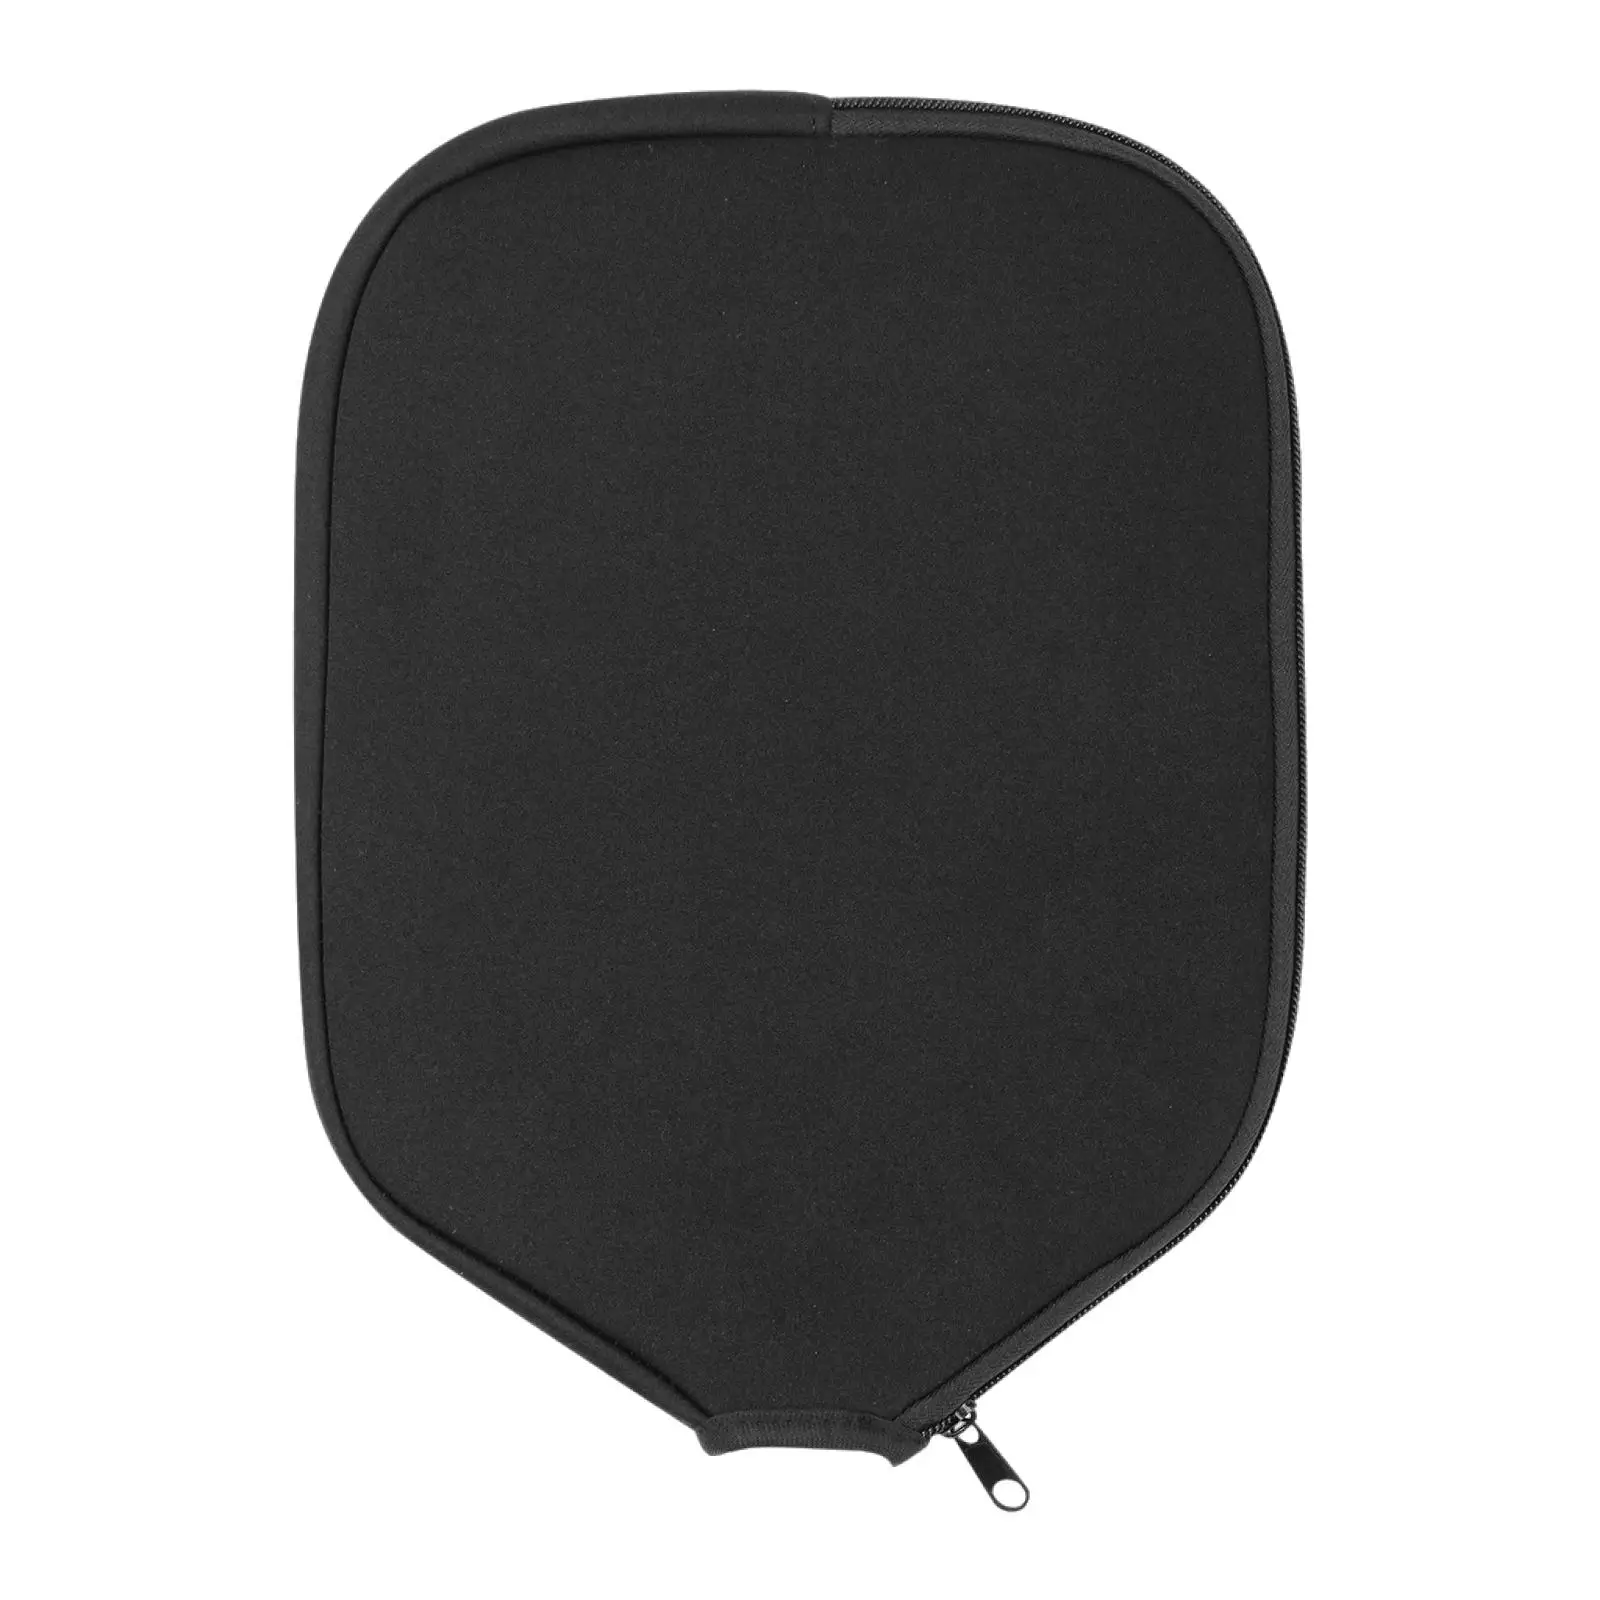 Pickleball Paddle Cover Only Pouch 11.8 x 8.86 inch Fits Most Paddle, Racket Black Neoprene Durable Table Tennis Paddle Case